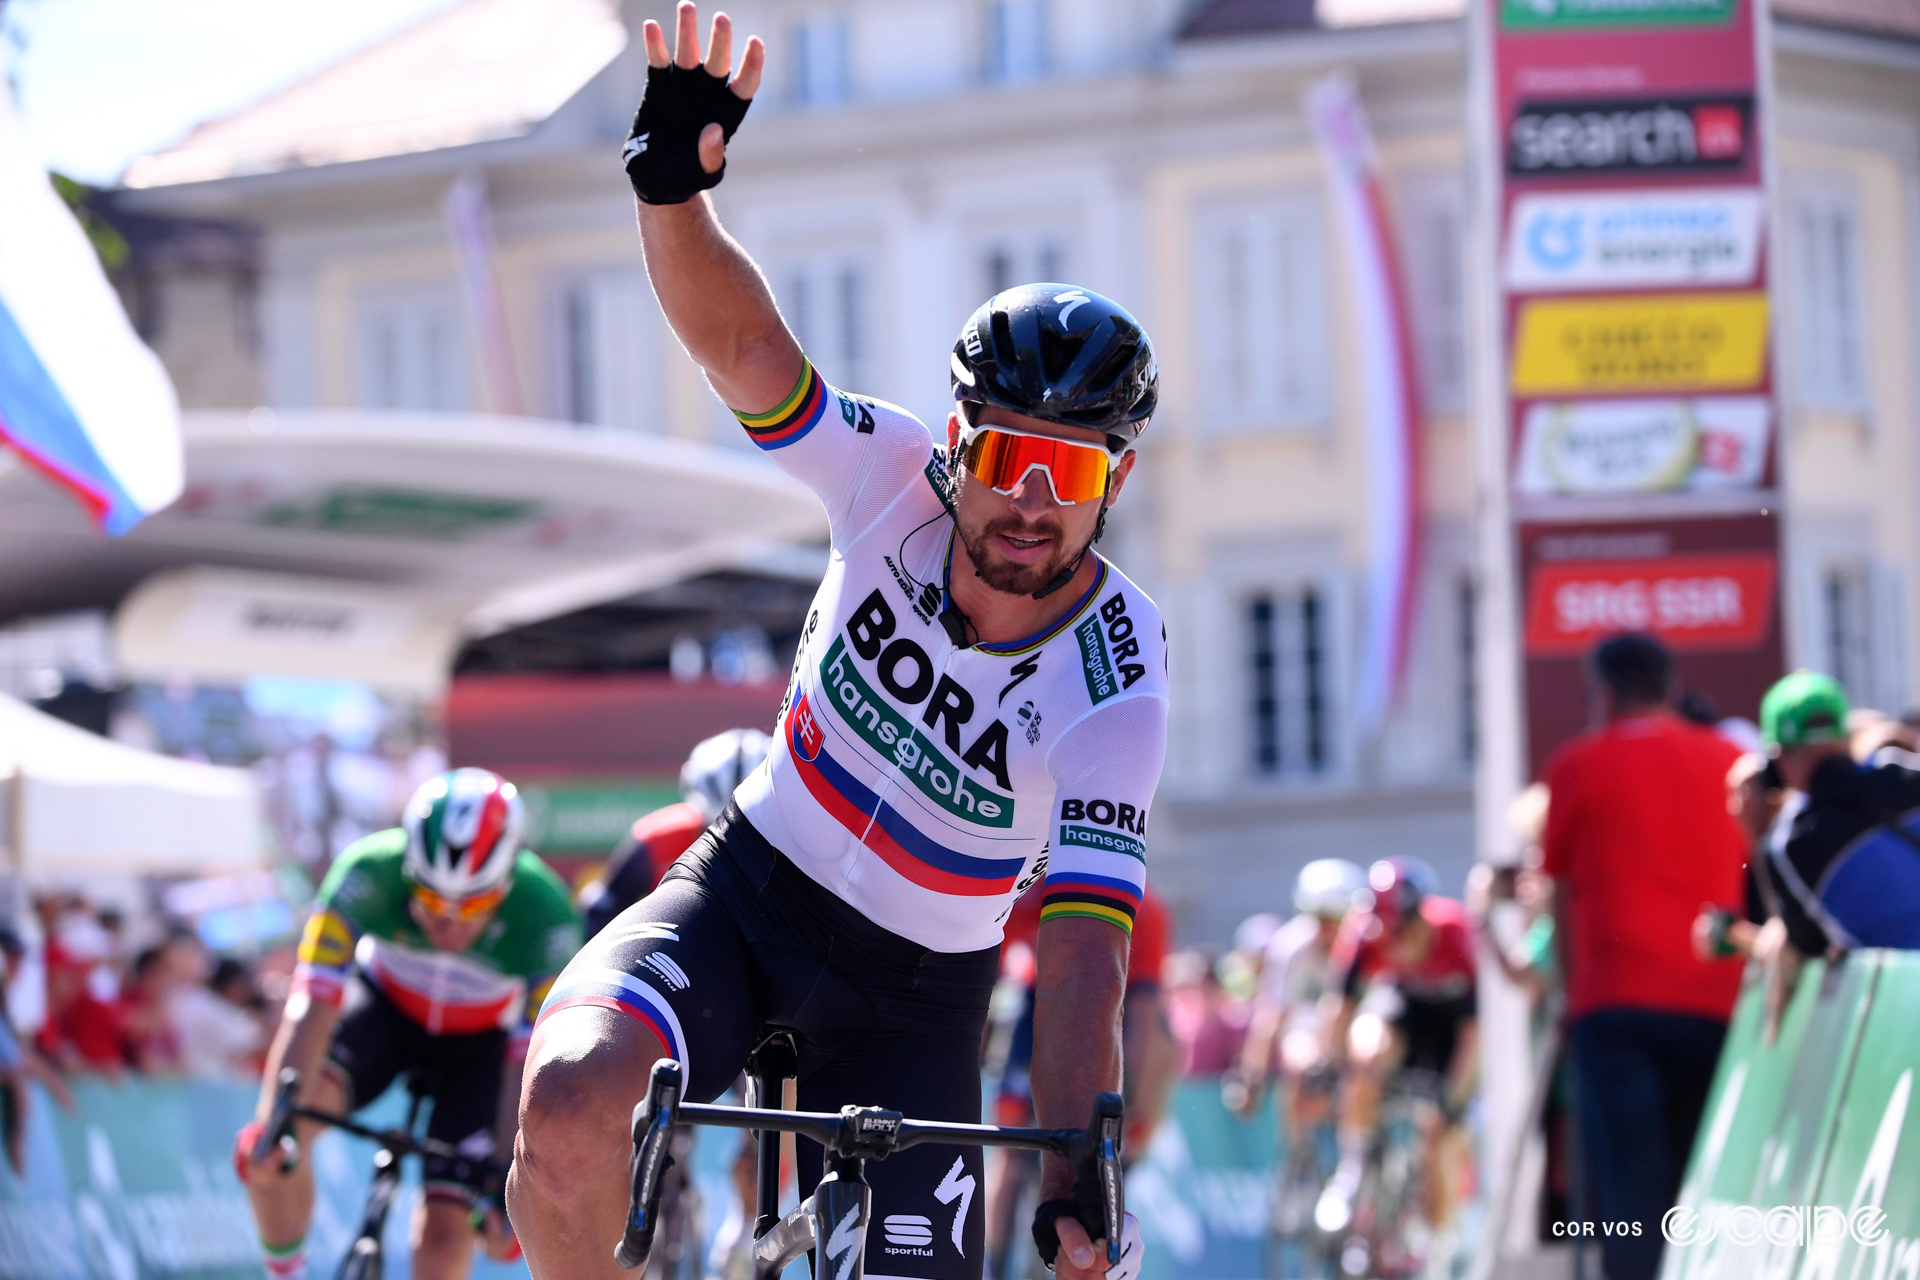 Peter Sagan celebrates winning a stage at the 2019 Tour de Suisse, with one arm in the air.